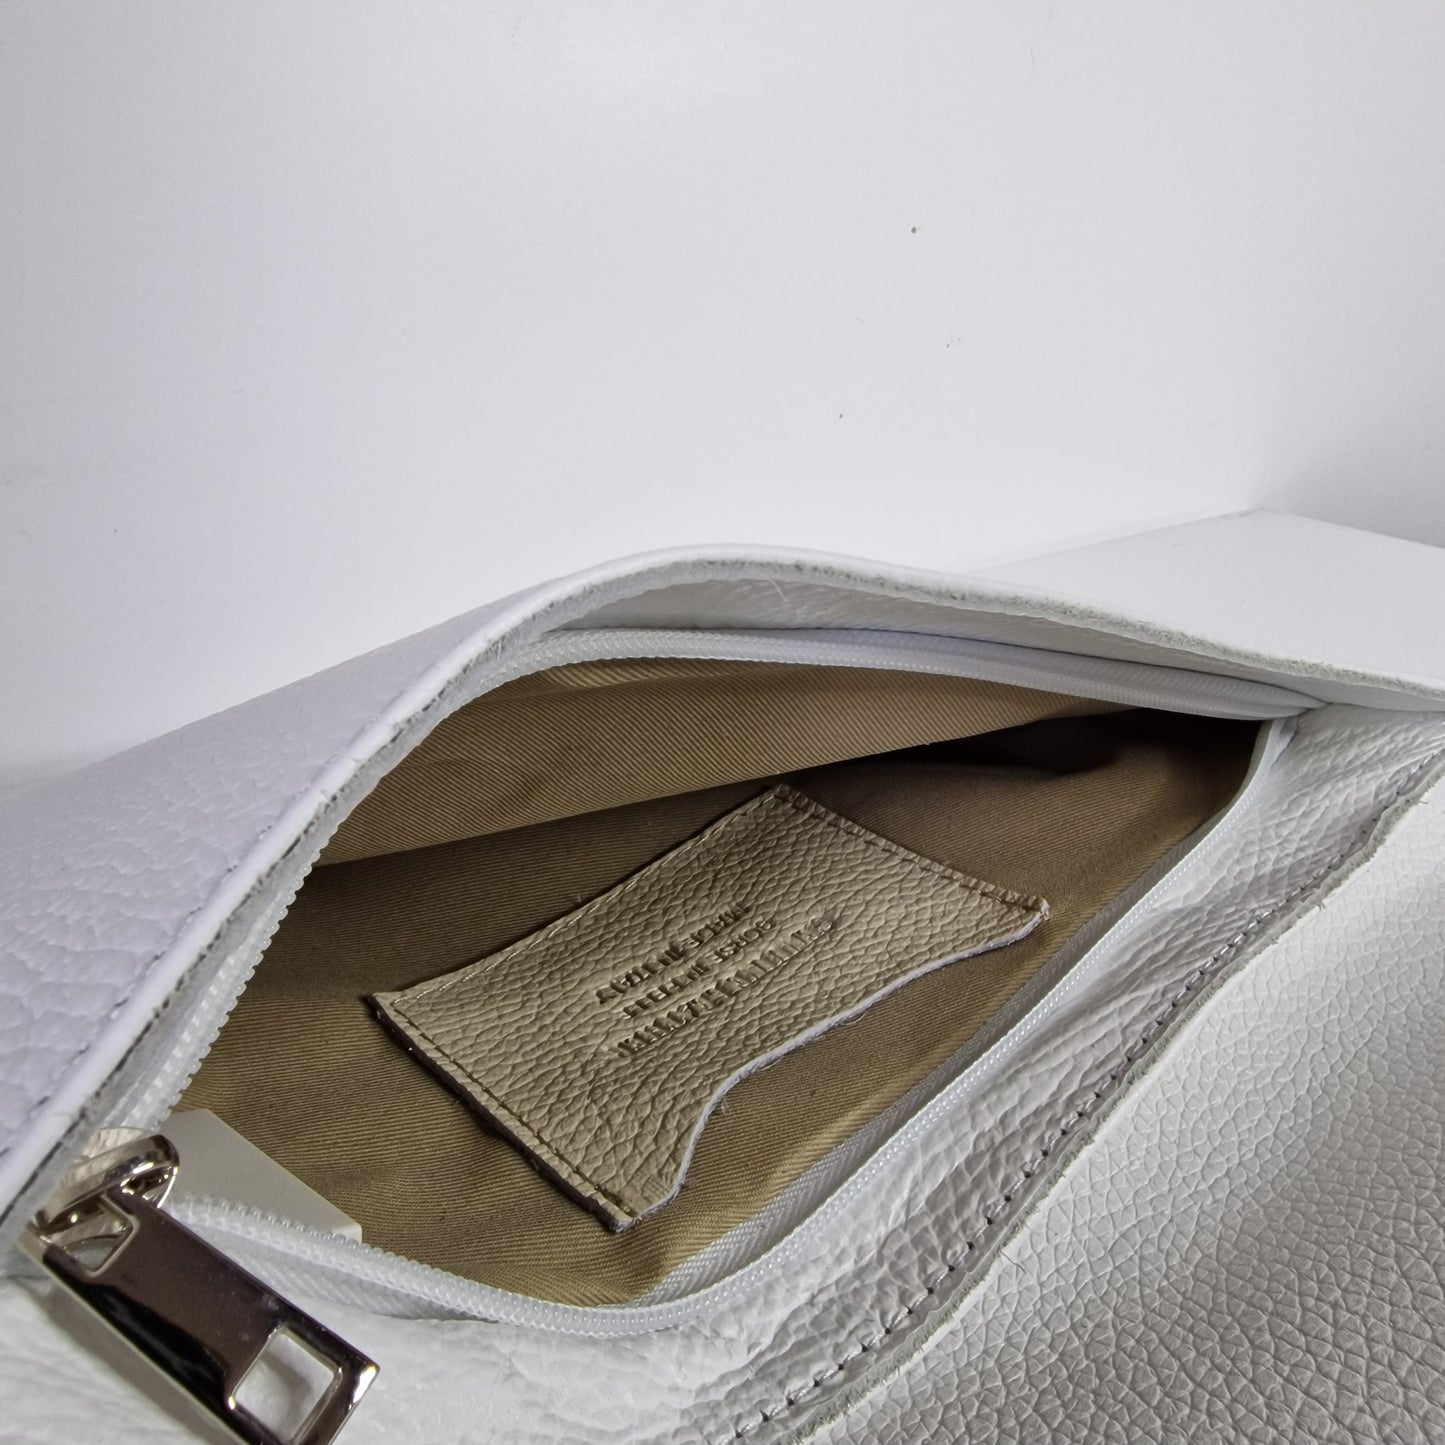 White Genuine Pebbled Leather Envelope Clutch